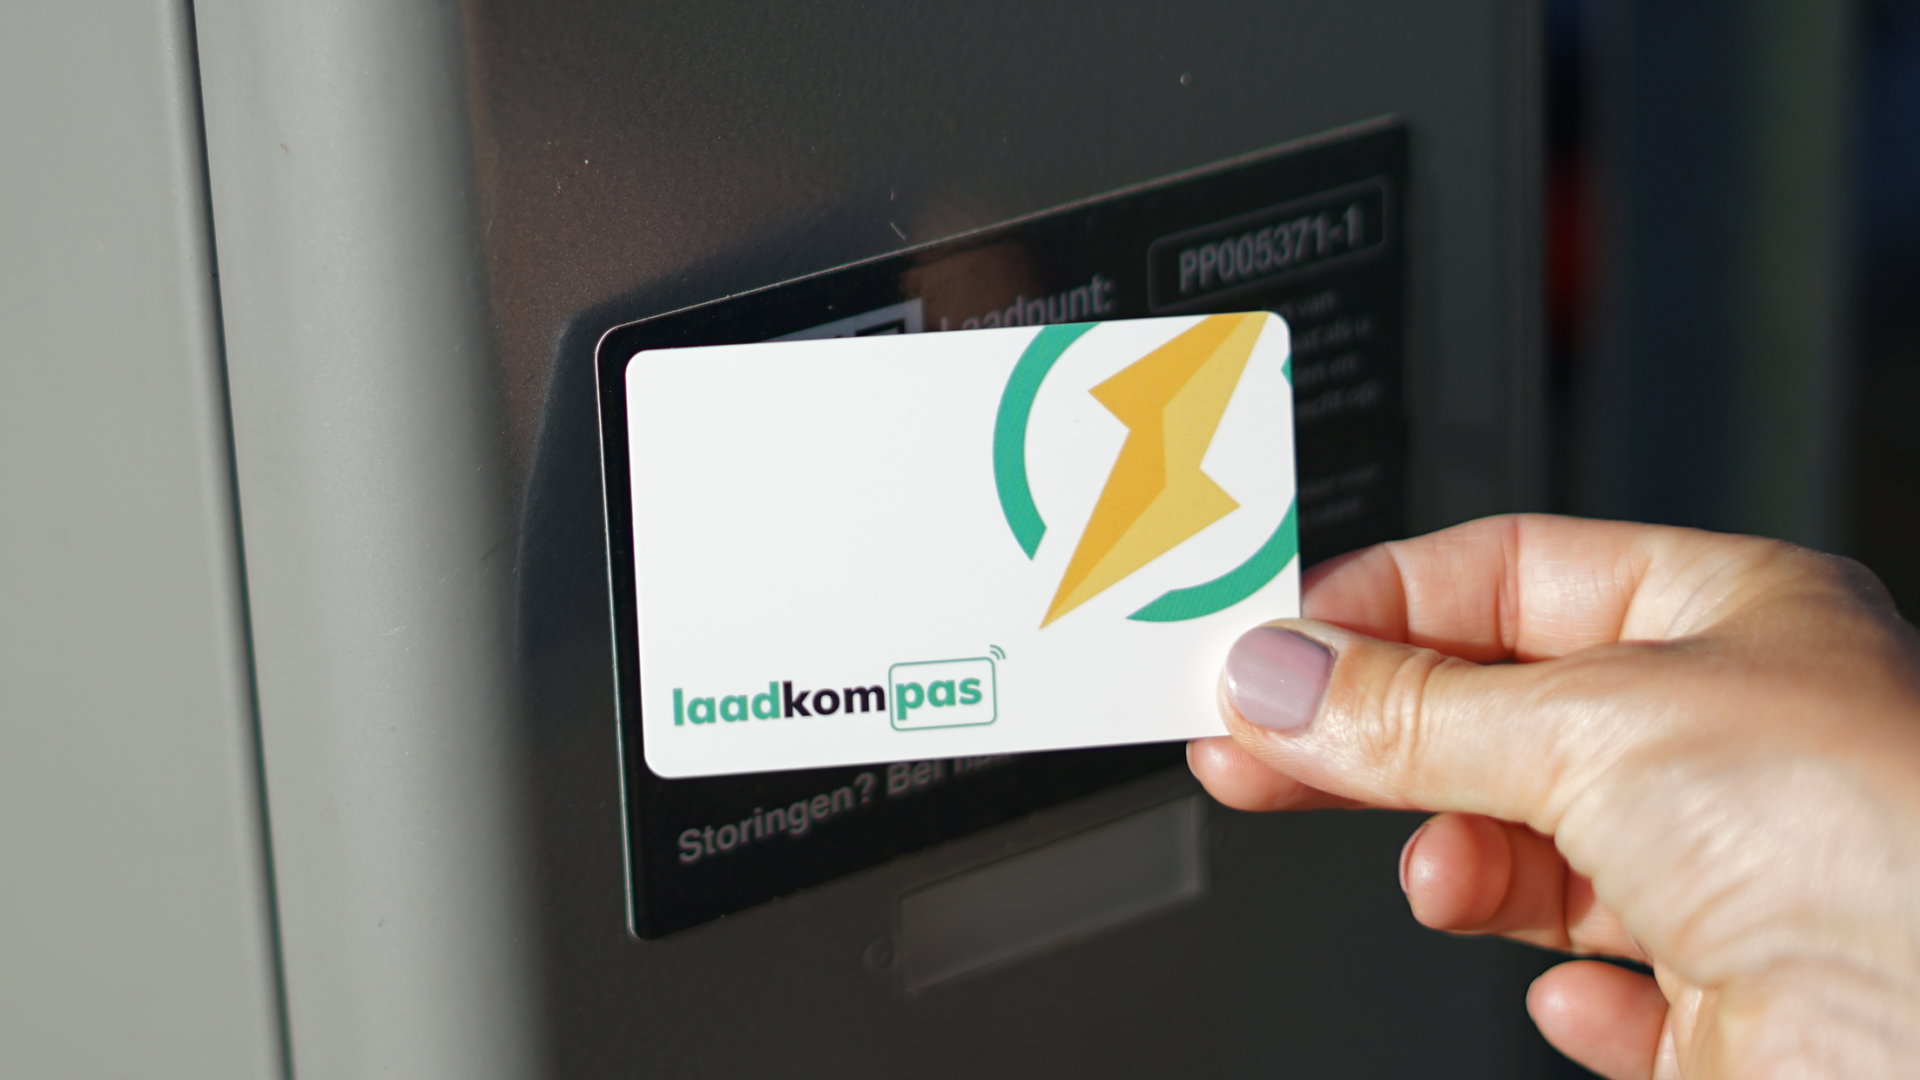 Over 35,000 Laadkompas customers can now use the application’s features on the Gireve network